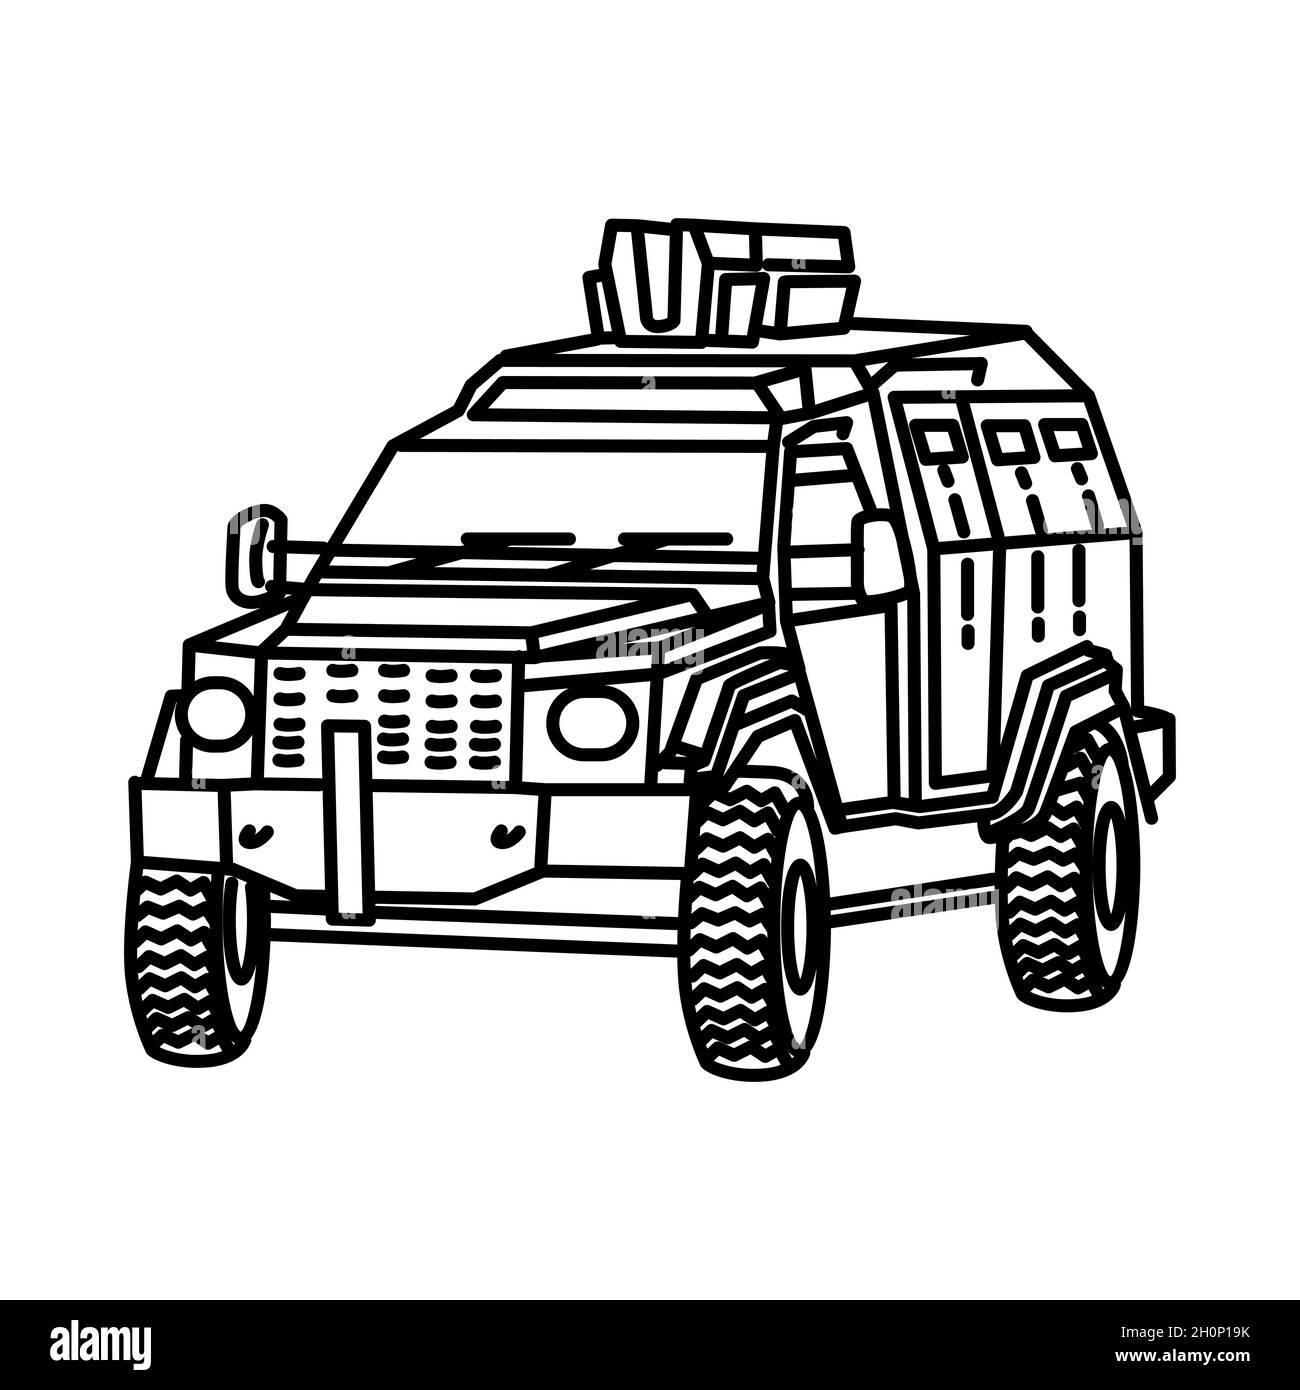 Police Armored Car Part of Police Equipment and Accessories Hand Drawn Icon Set Vector. Stock Vector